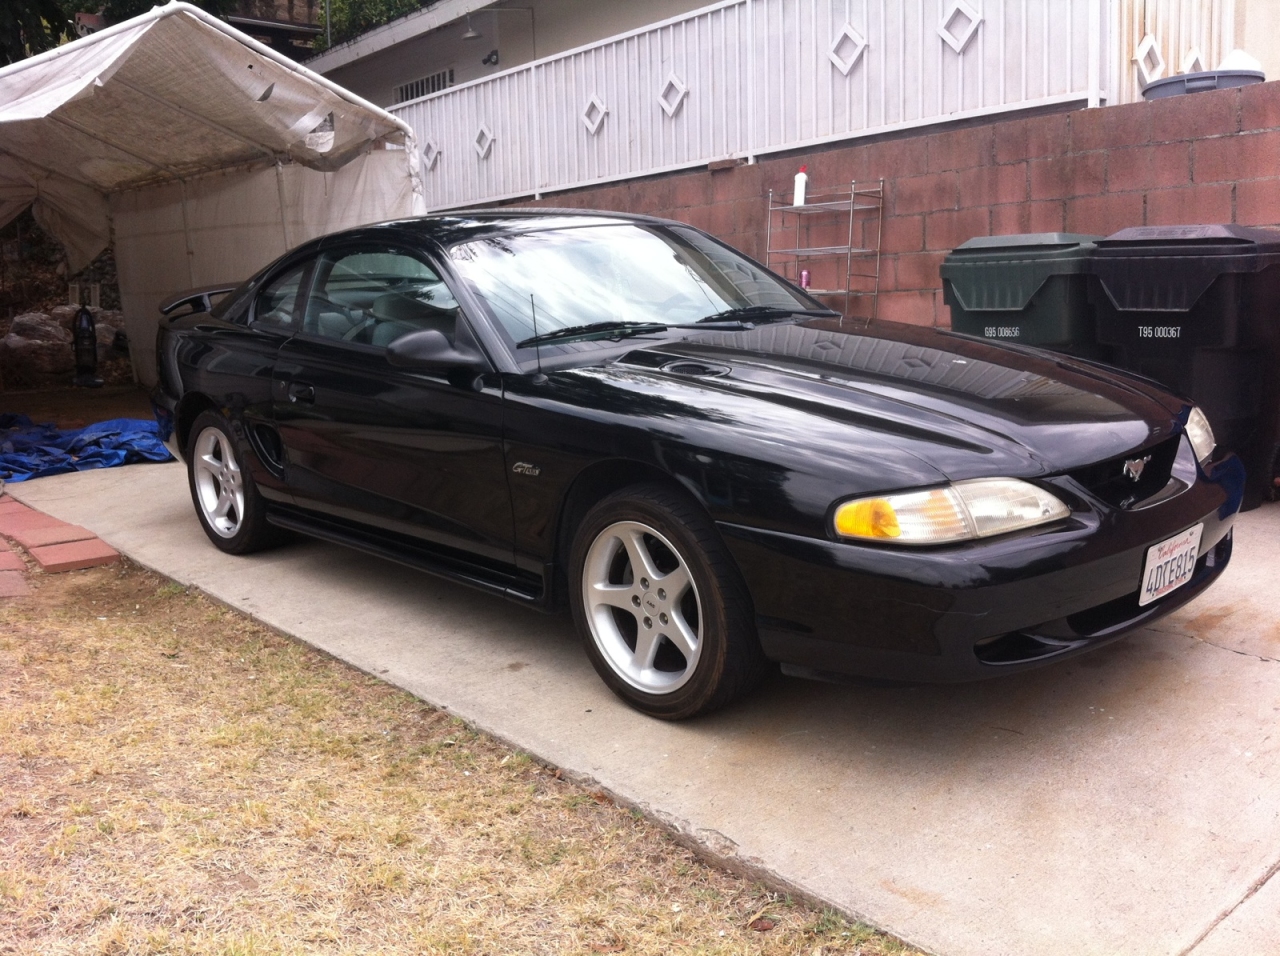 1998 Ford mustang gt coupe specs #1